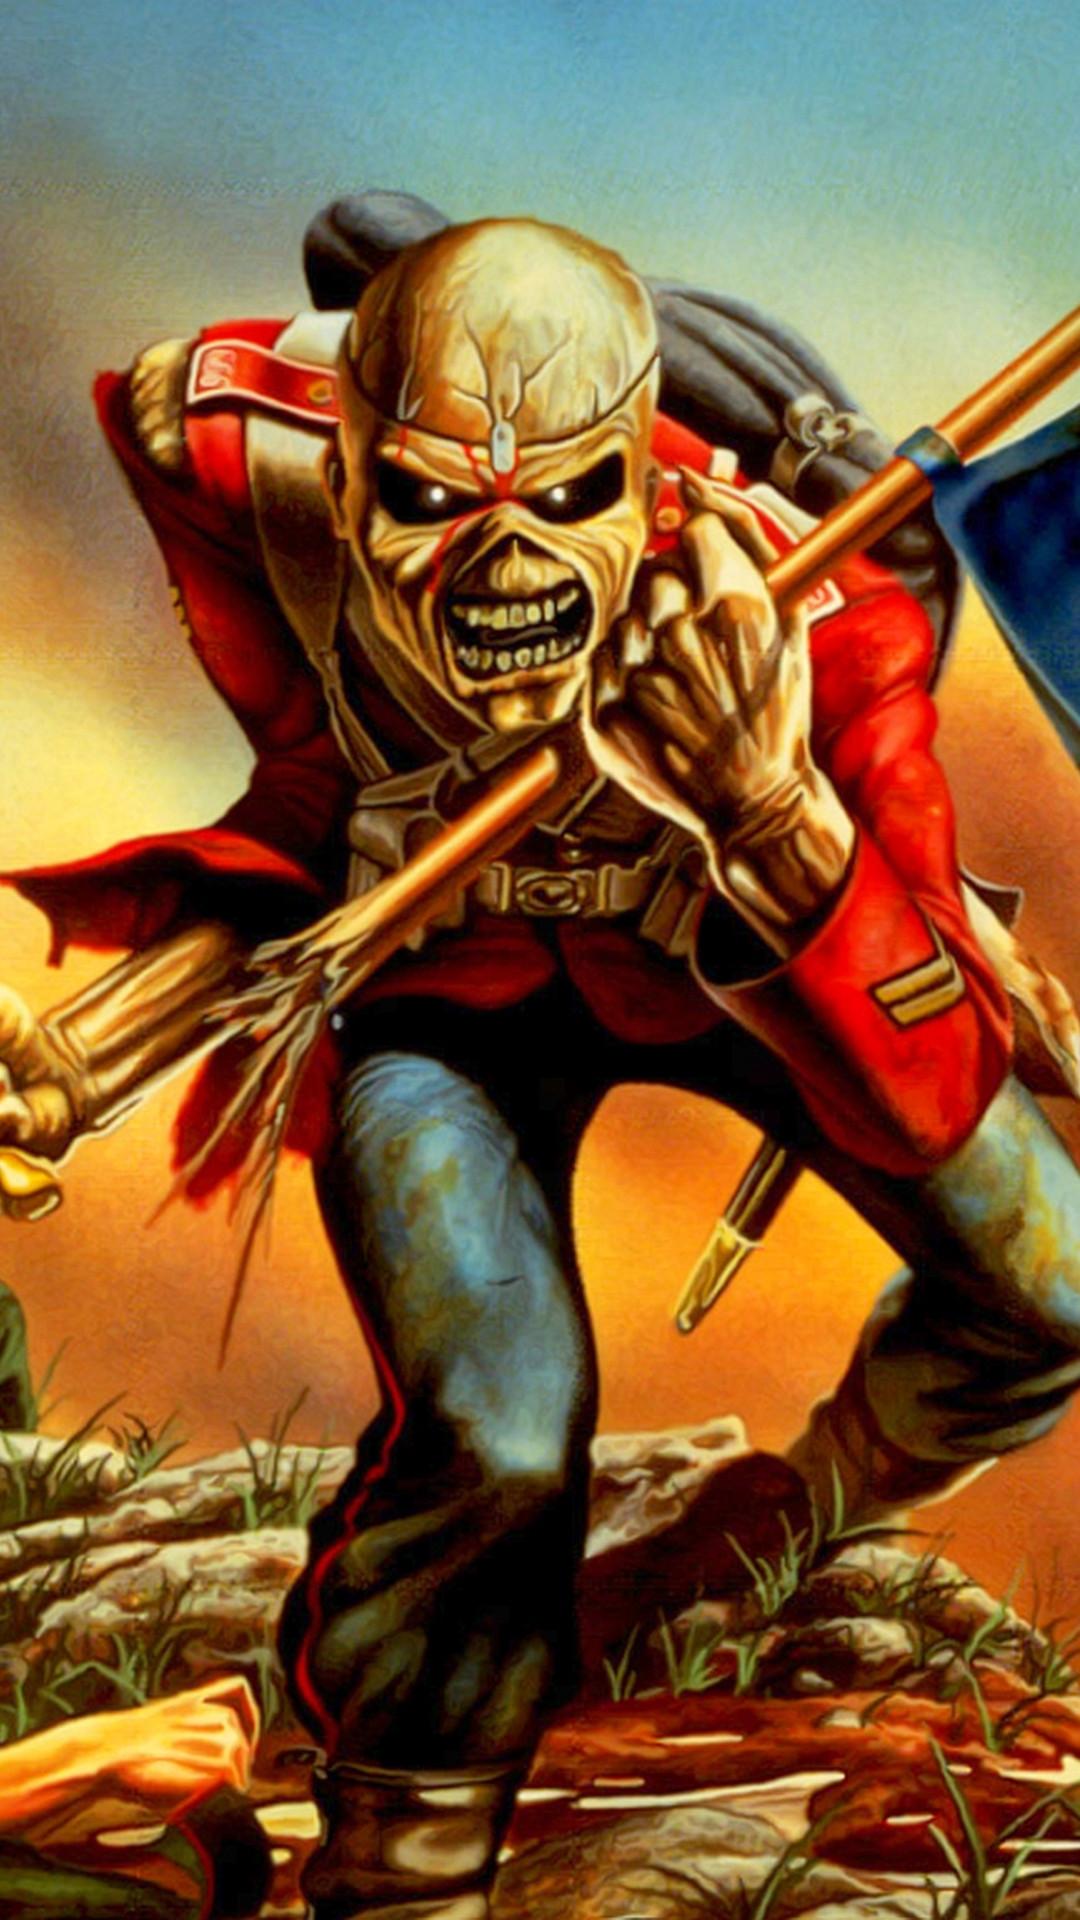 Iron Maiden Phone Wallpapers - Top Free Iron Maiden Phone Backgrounds ...